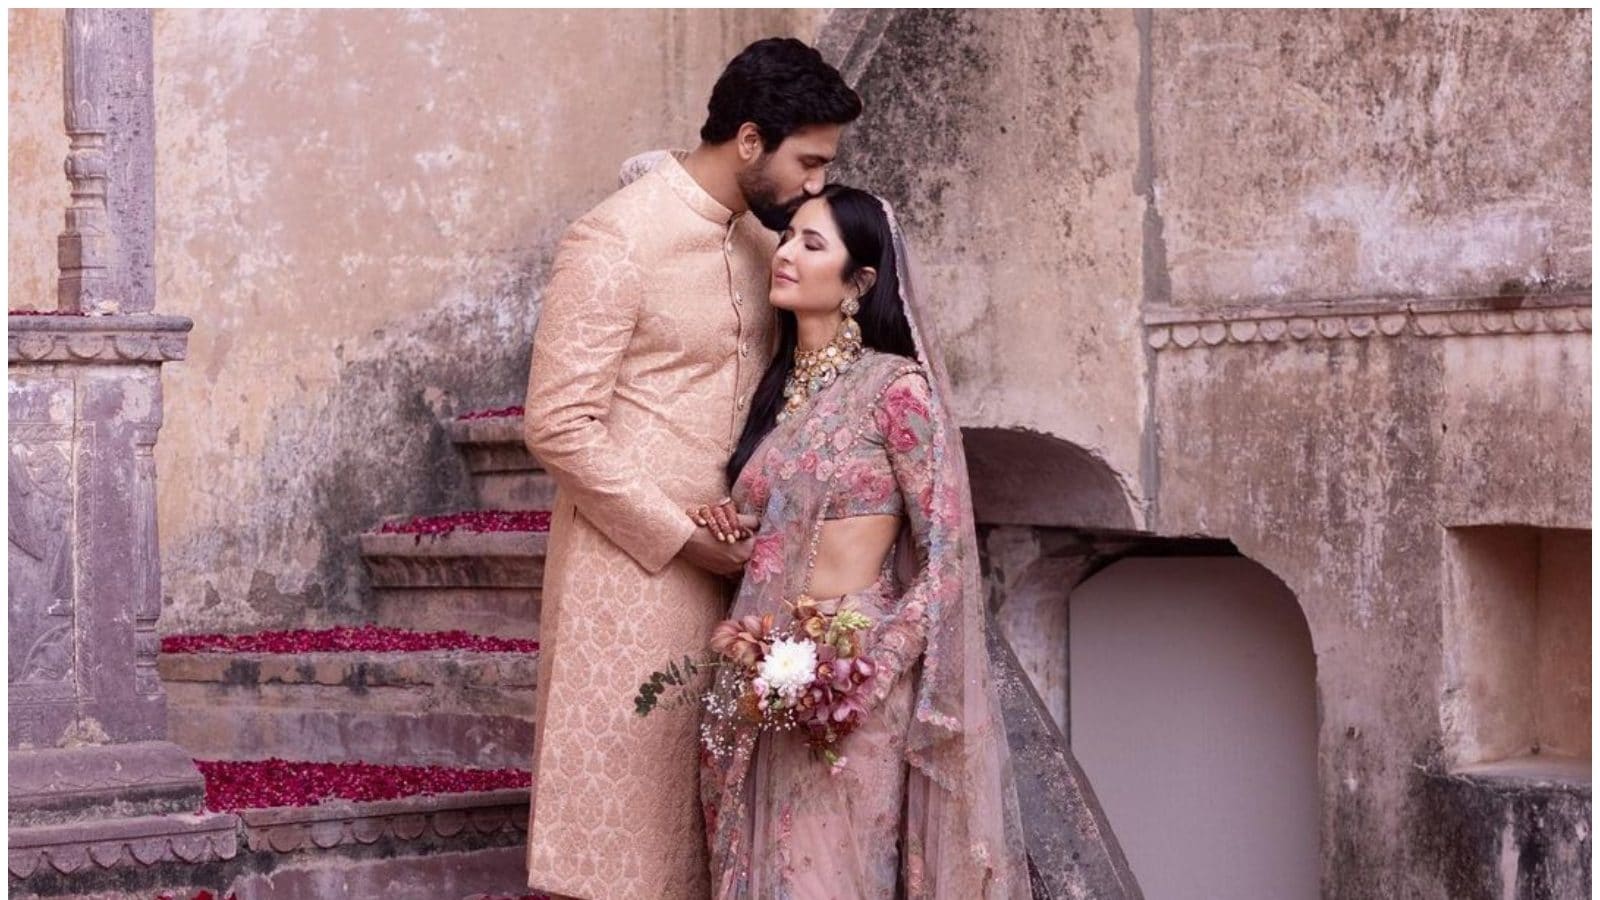 Katrina Kaif and Vicky Kaushal Got Their Marriage Registered On This